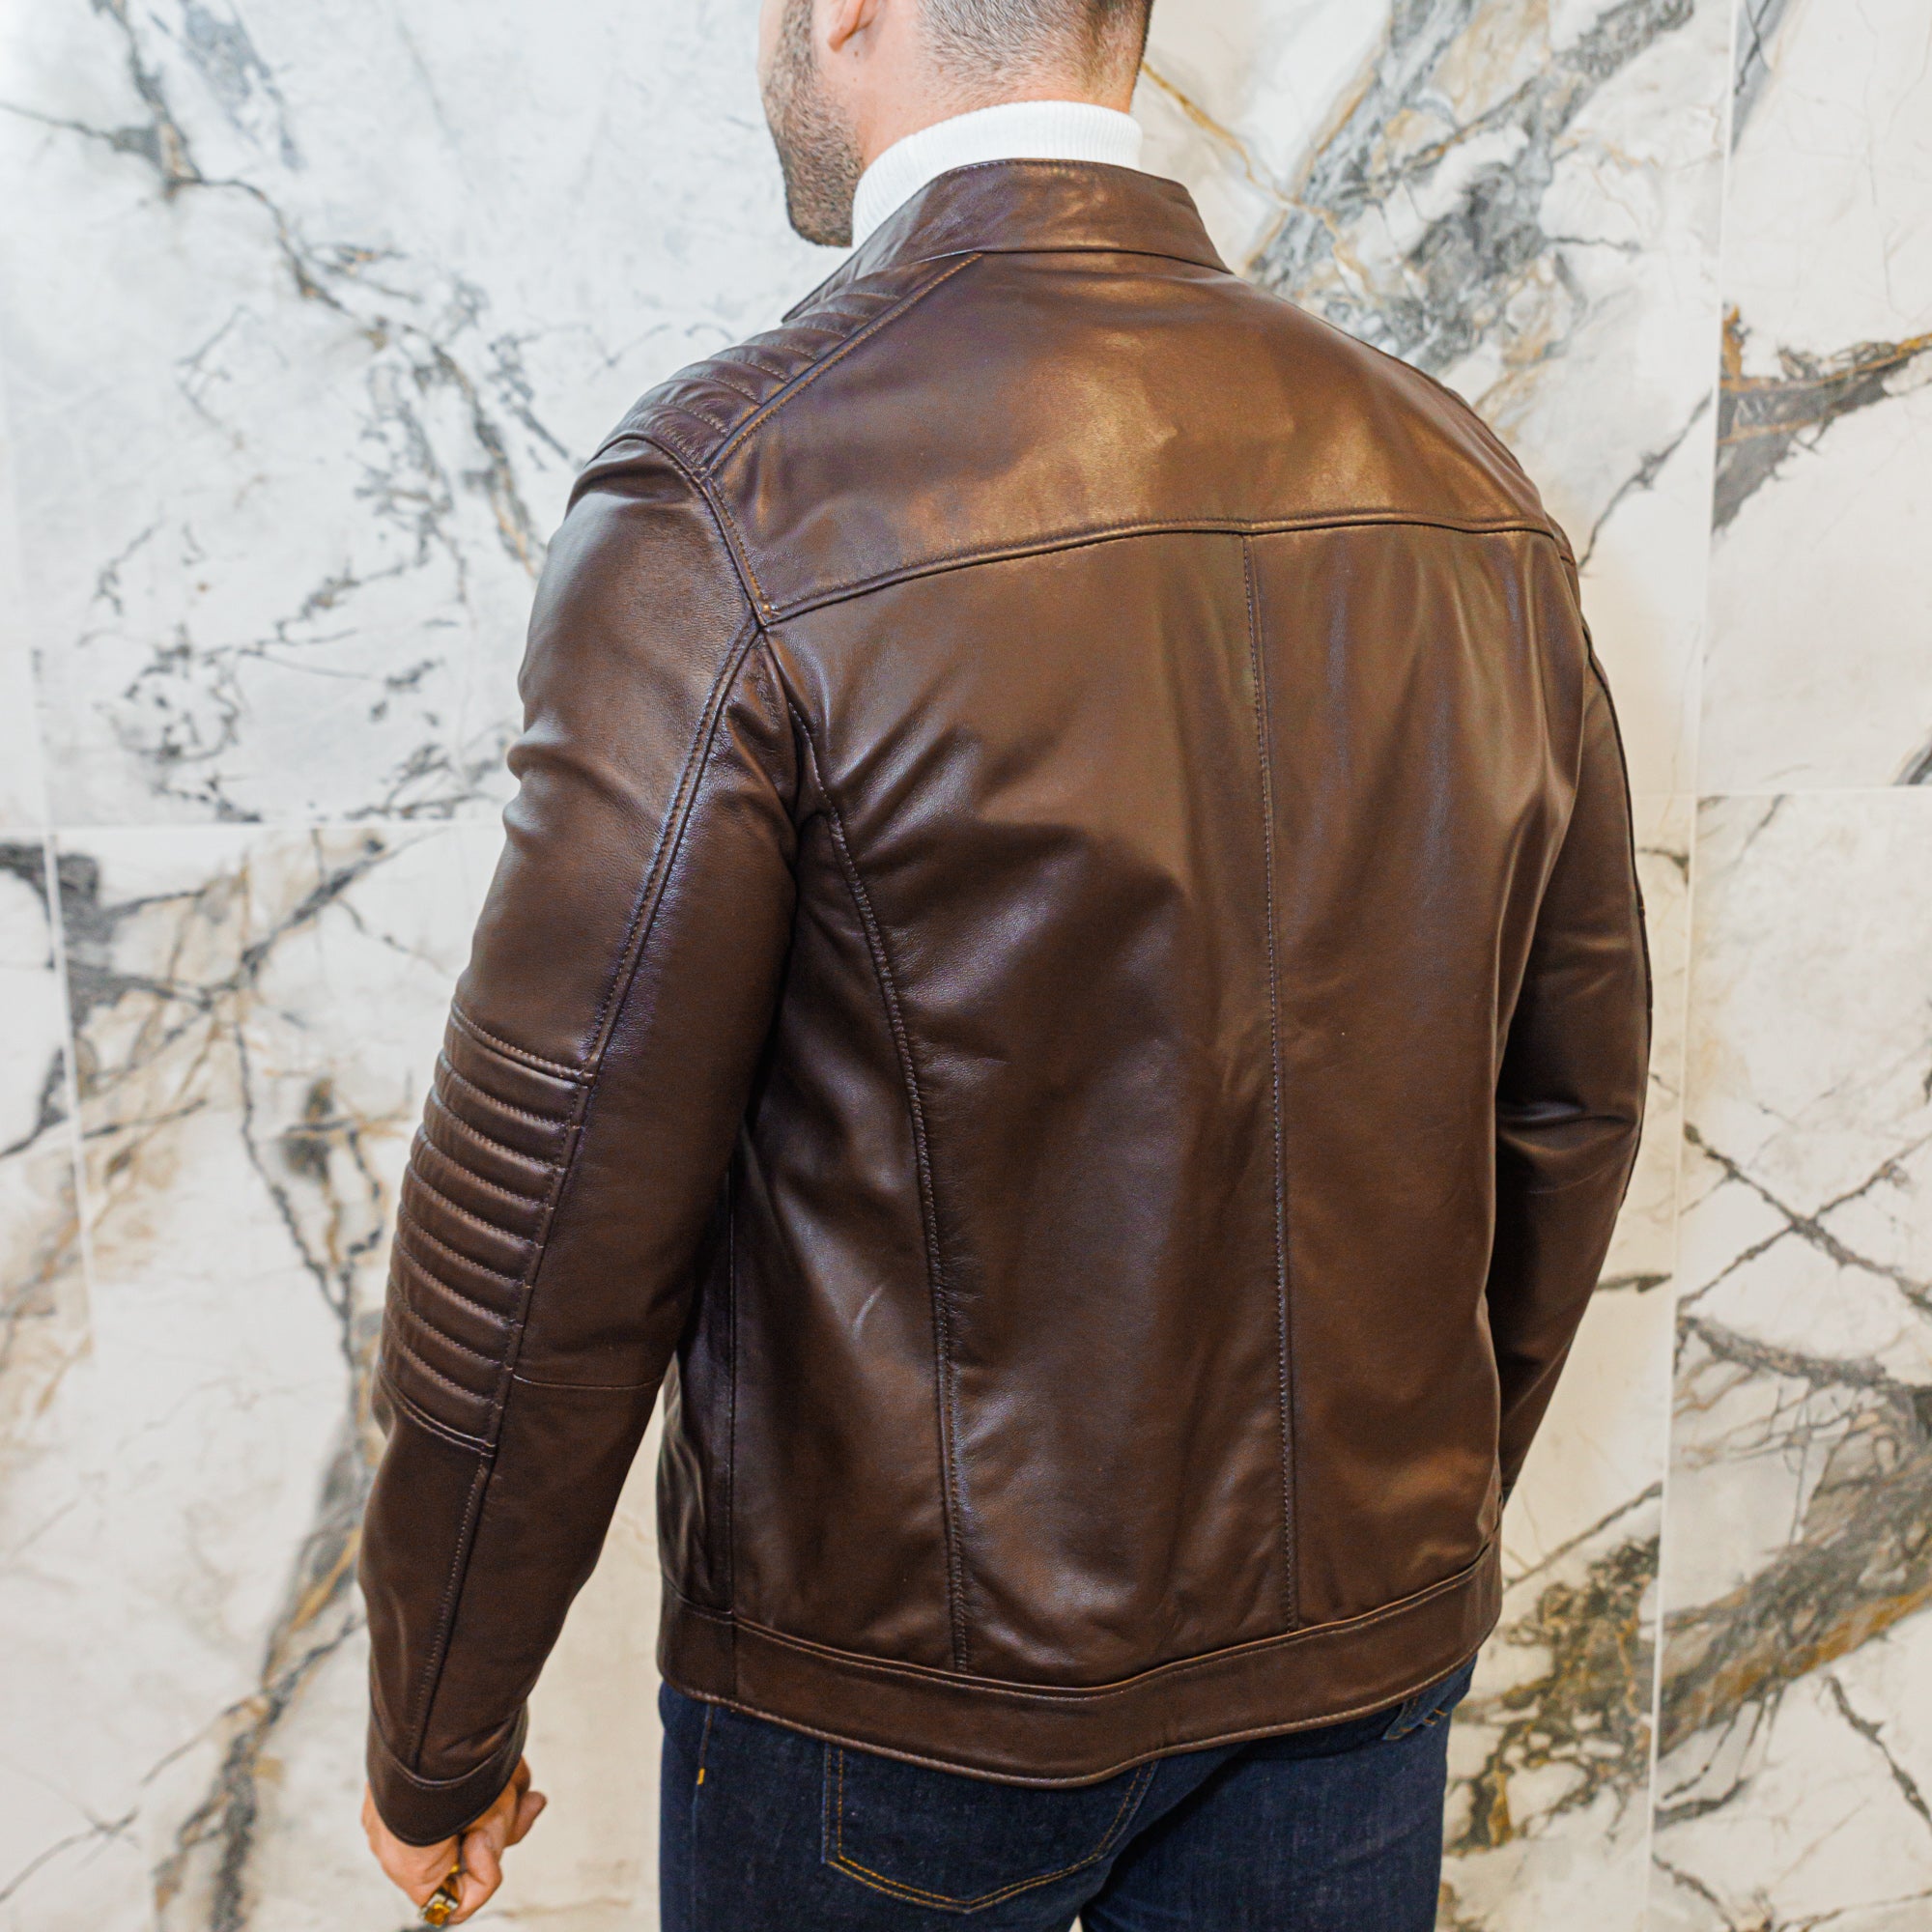 Lambskin Leather Jacket - Chocolate Brown - Leather Jacket by Urbbana